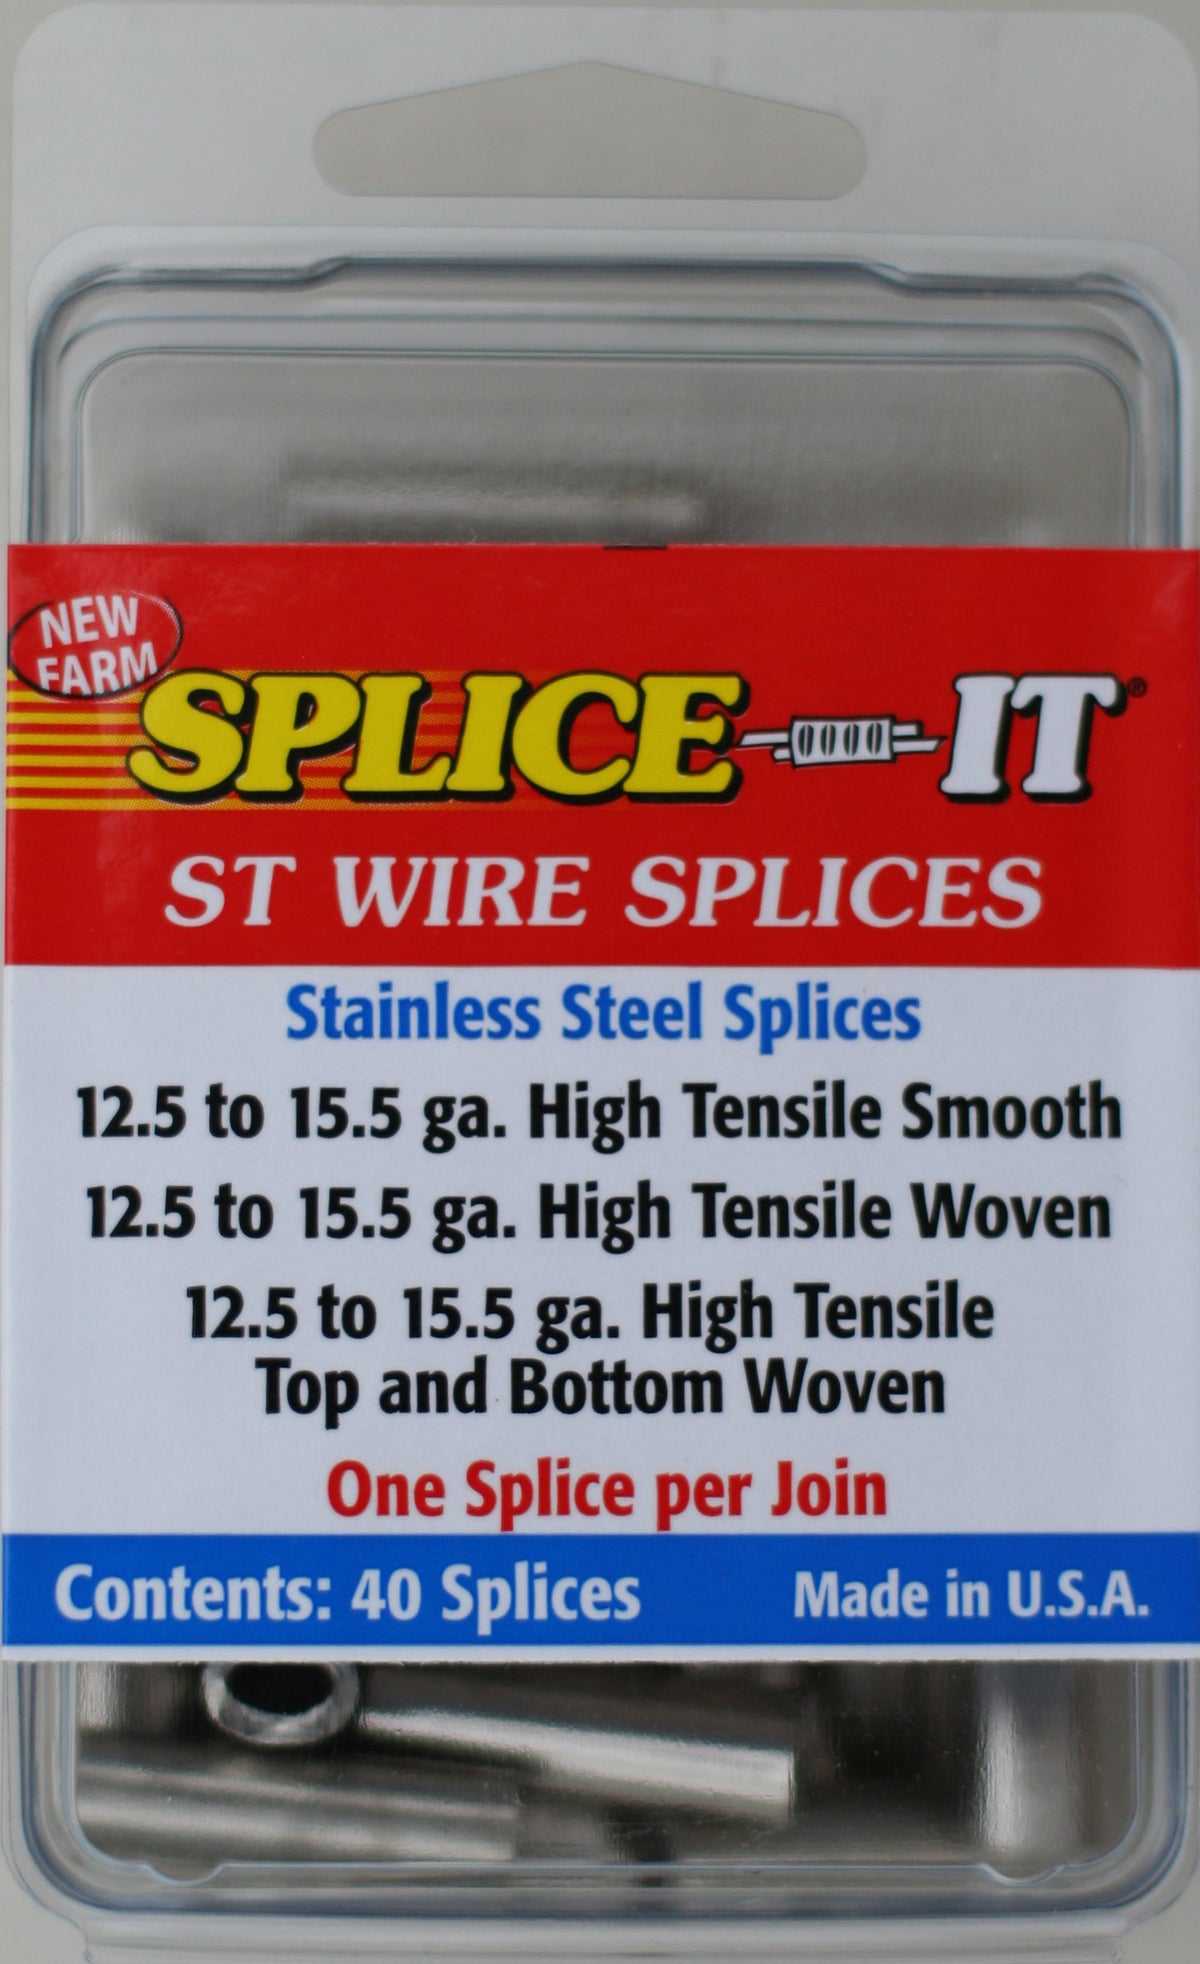 New Farm ST5 Splice-It Stainless Steel Fence Splices, 40-Count